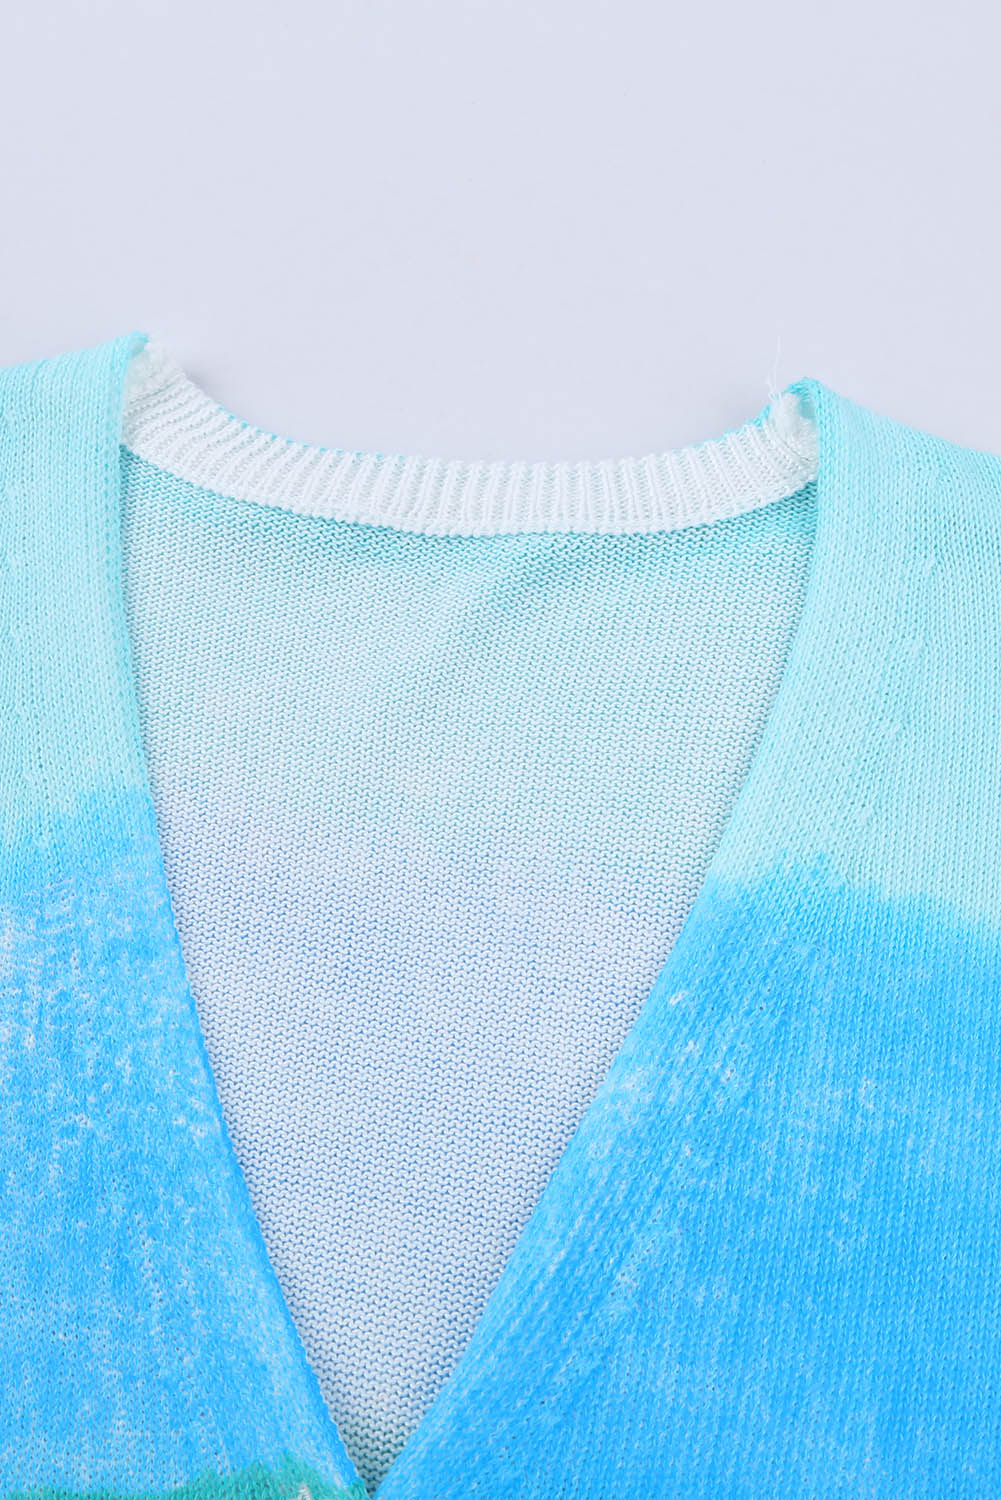 Blue Rainbow Ombre Pockets Buttoned Cardigan